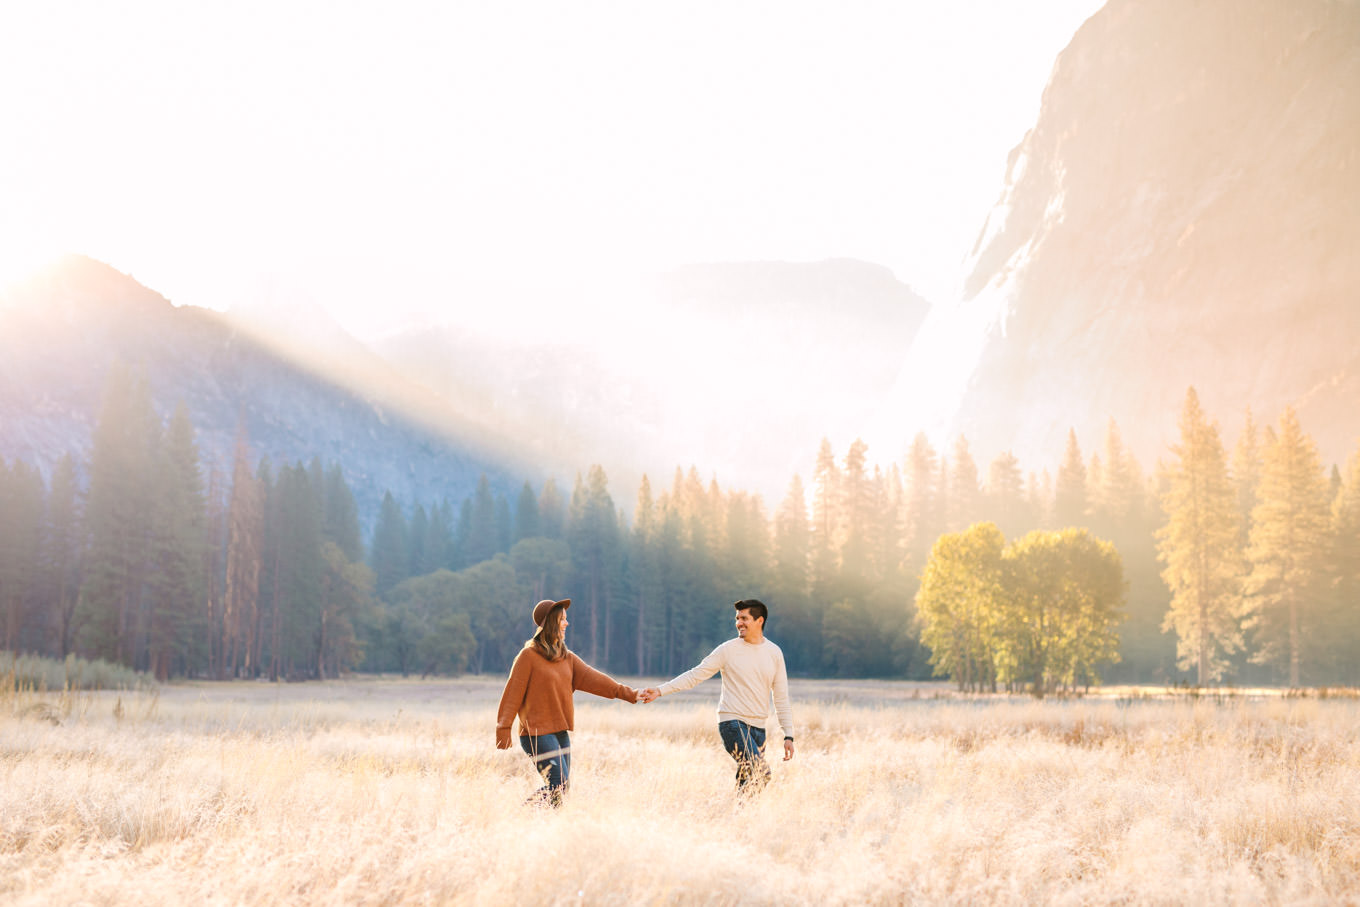 Yosemite National Park engagement session at sunrise Los Angeles Chinatown engagement session | Engagement, elopement, and wedding photography roundup of Mary Costa’s favorite images from 2020 | Colorful and elevated photography for fun-loving couples in Southern California | #2020wedding #elopement #weddingphoto #weddingphotography #microwedding   Source: Mary Costa Photography | Los Angeles